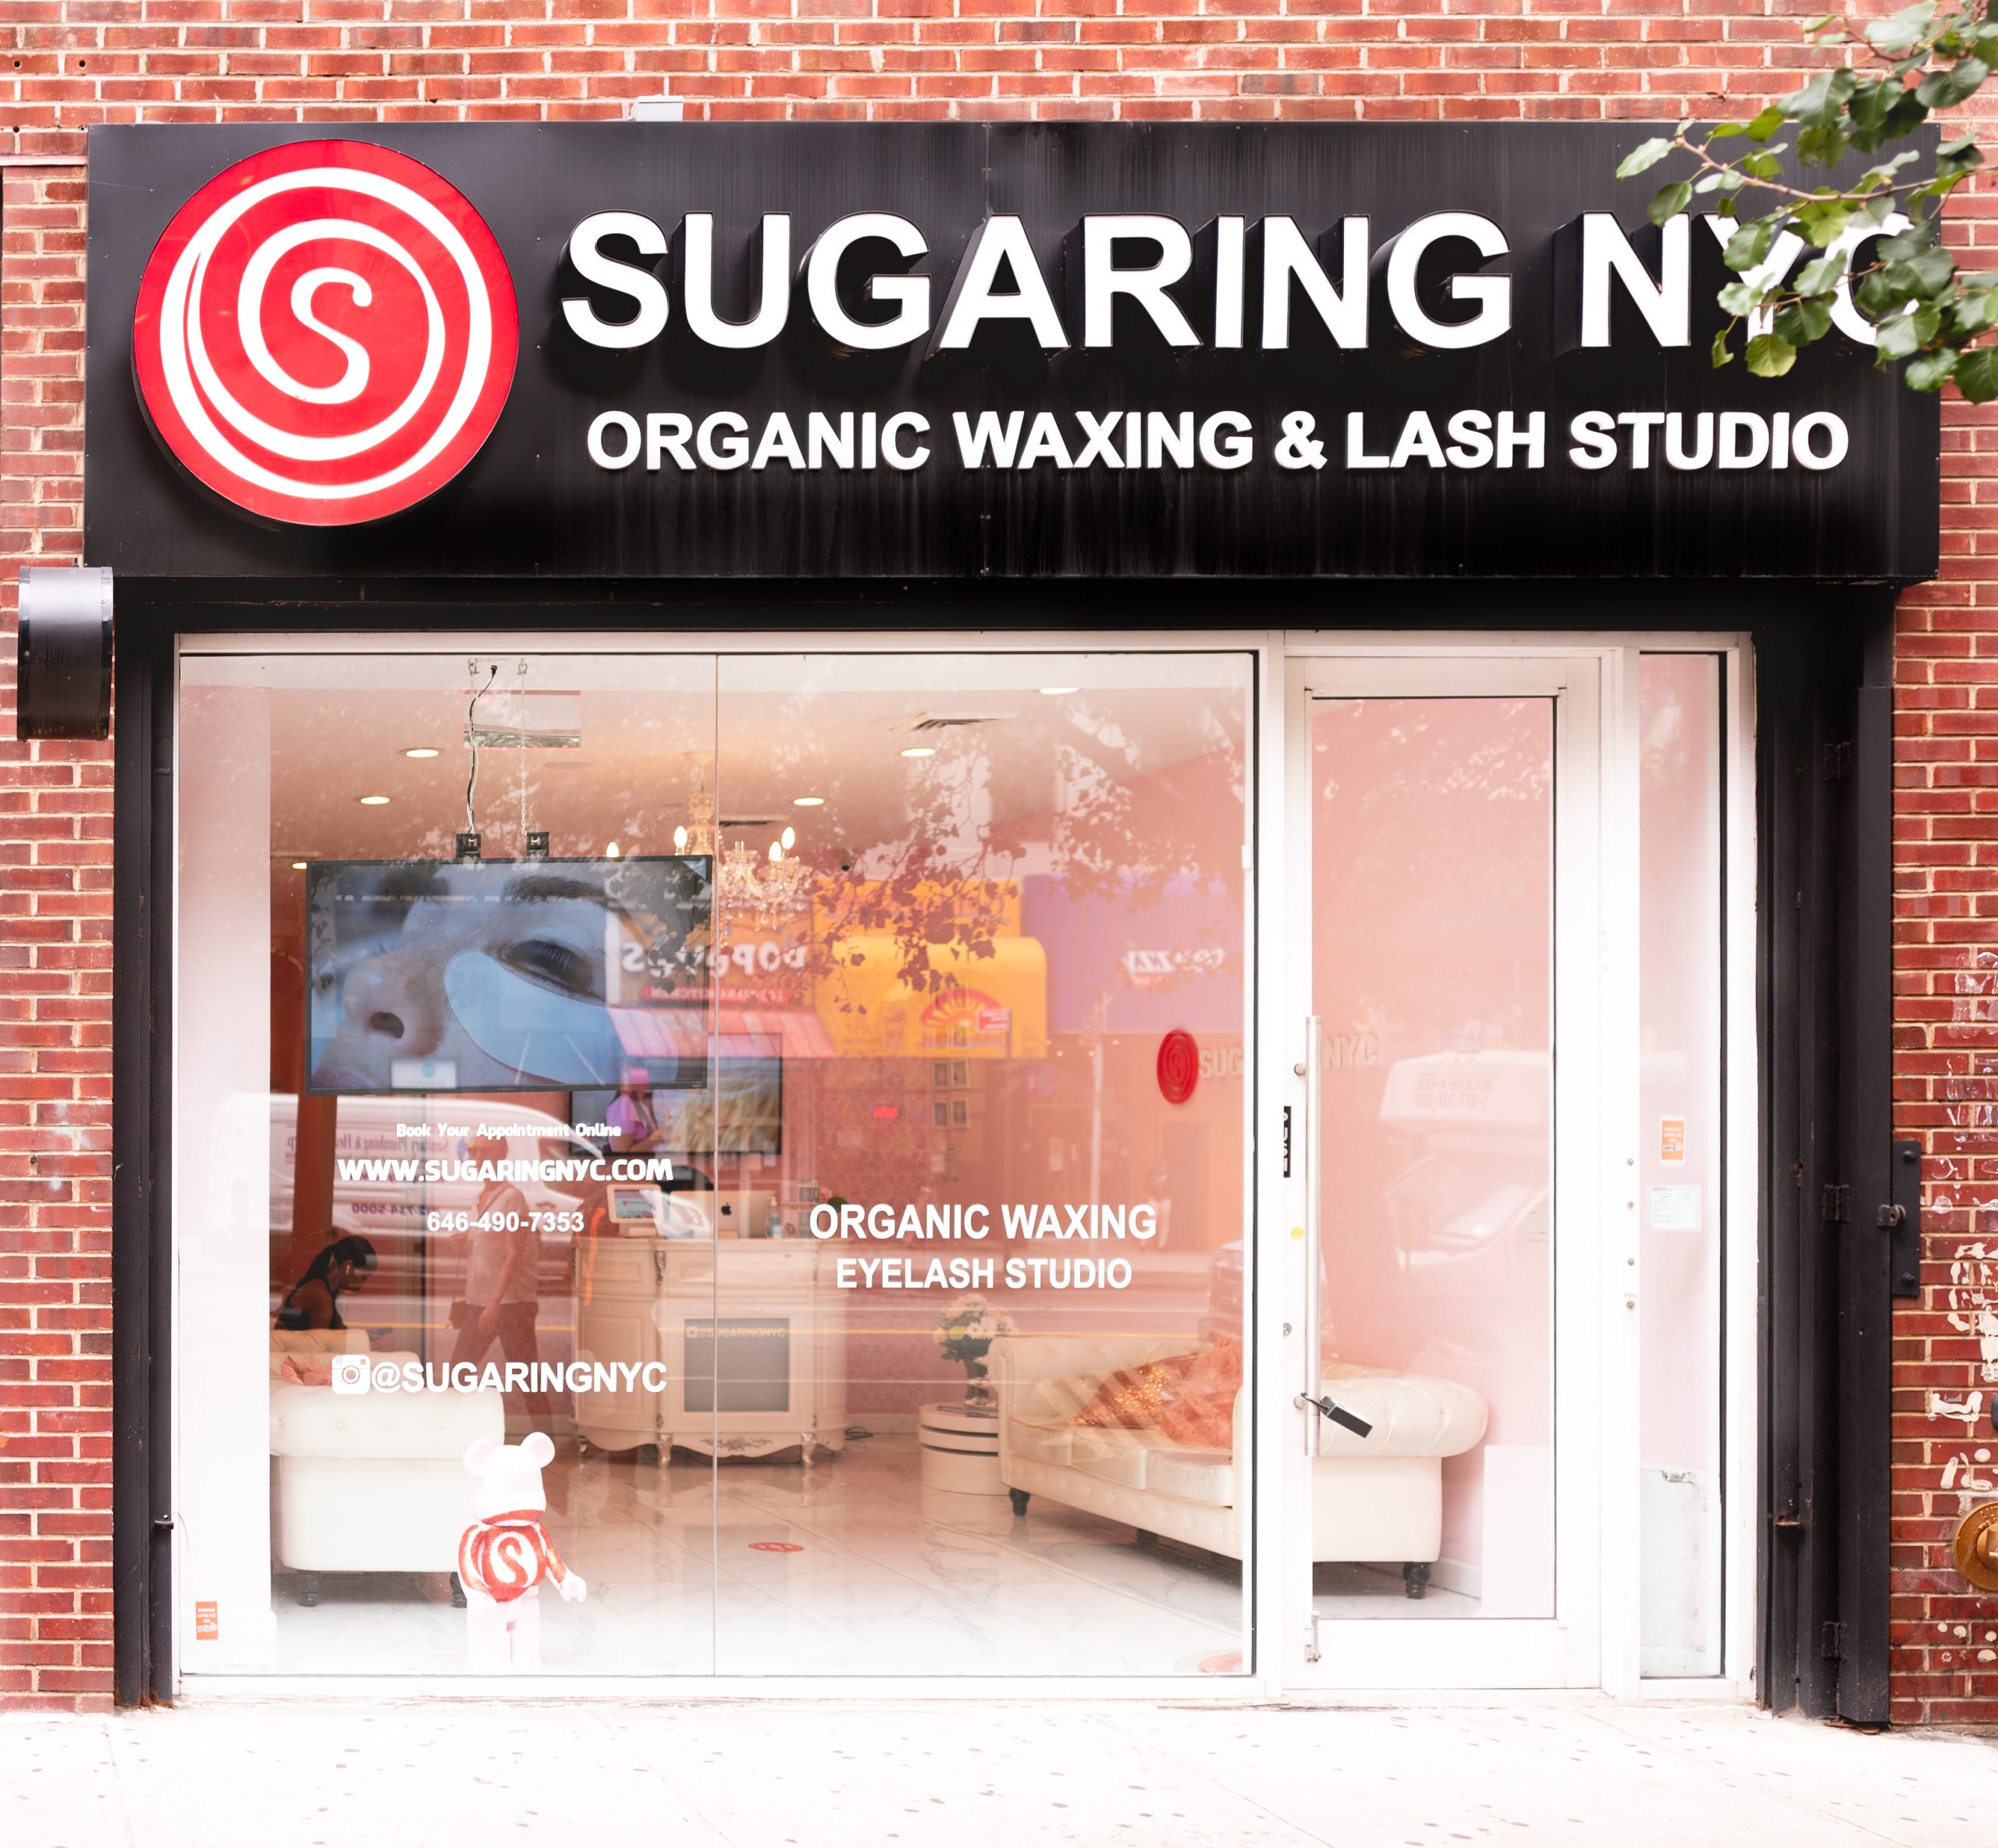 My favorite sugarista is booked Sugaring NYC Nationwide Organic Hair Removal Salon